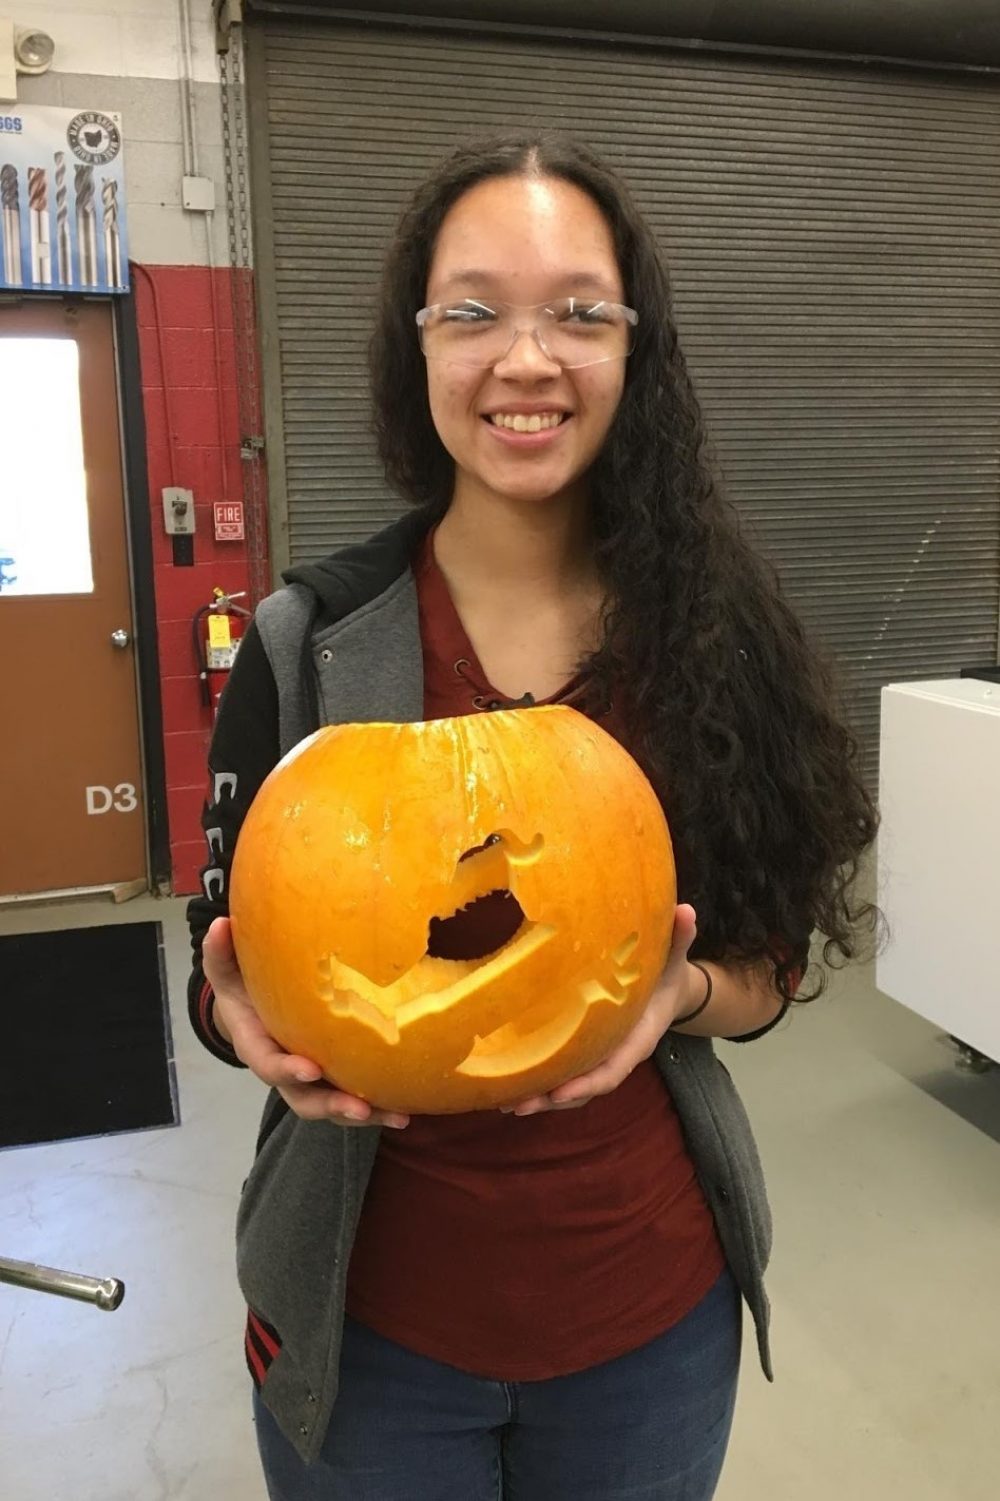 A student holding a pumpkin with the Ghostbusters logo